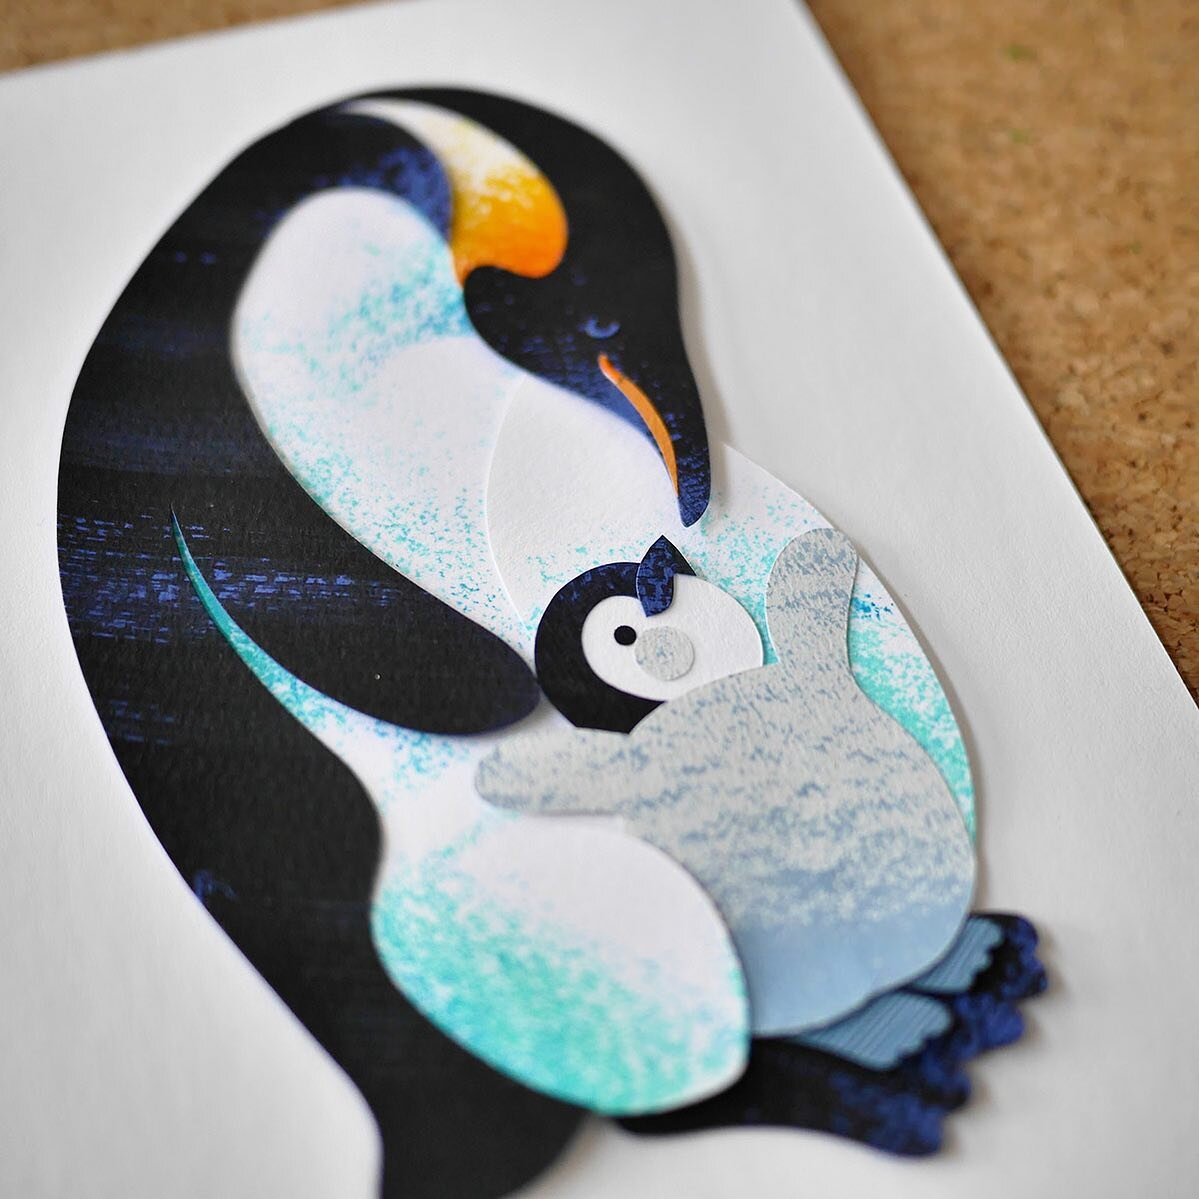 Snowy out today &mdash; makes me think of these two. ❄️❄️❄️❄️❄️❄️

Art from my book, Love You Head to Toe. @owlkidspublishing 

#emperorpenguin #emperorpenguins #emperorpenguinchick #penguinchick #paperpenguin #penguinsofinstagram #cutpaper #cutpaper